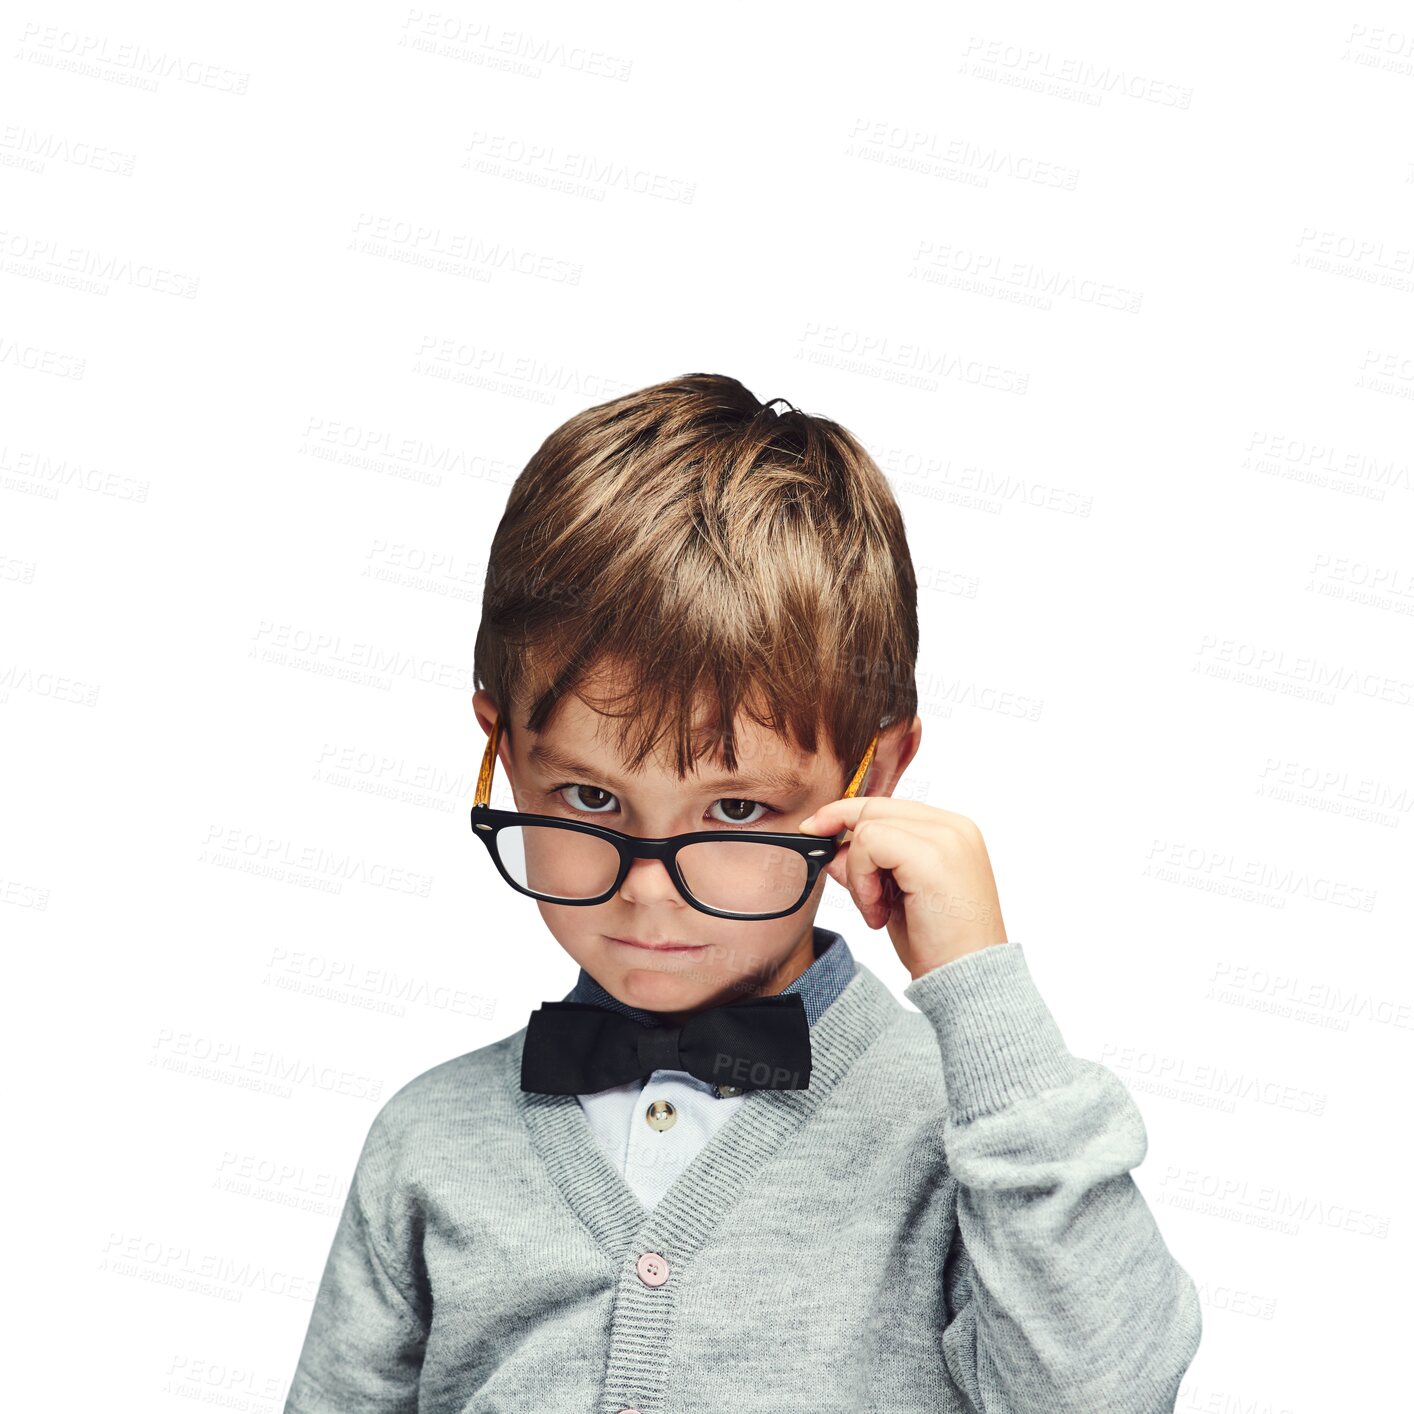 Buy stock photo Portrait, kids and nerd boy in glasses isolated on transparent background for intelligence. Face, smart and eyewear with confident young child geek on PNG for school, education or development